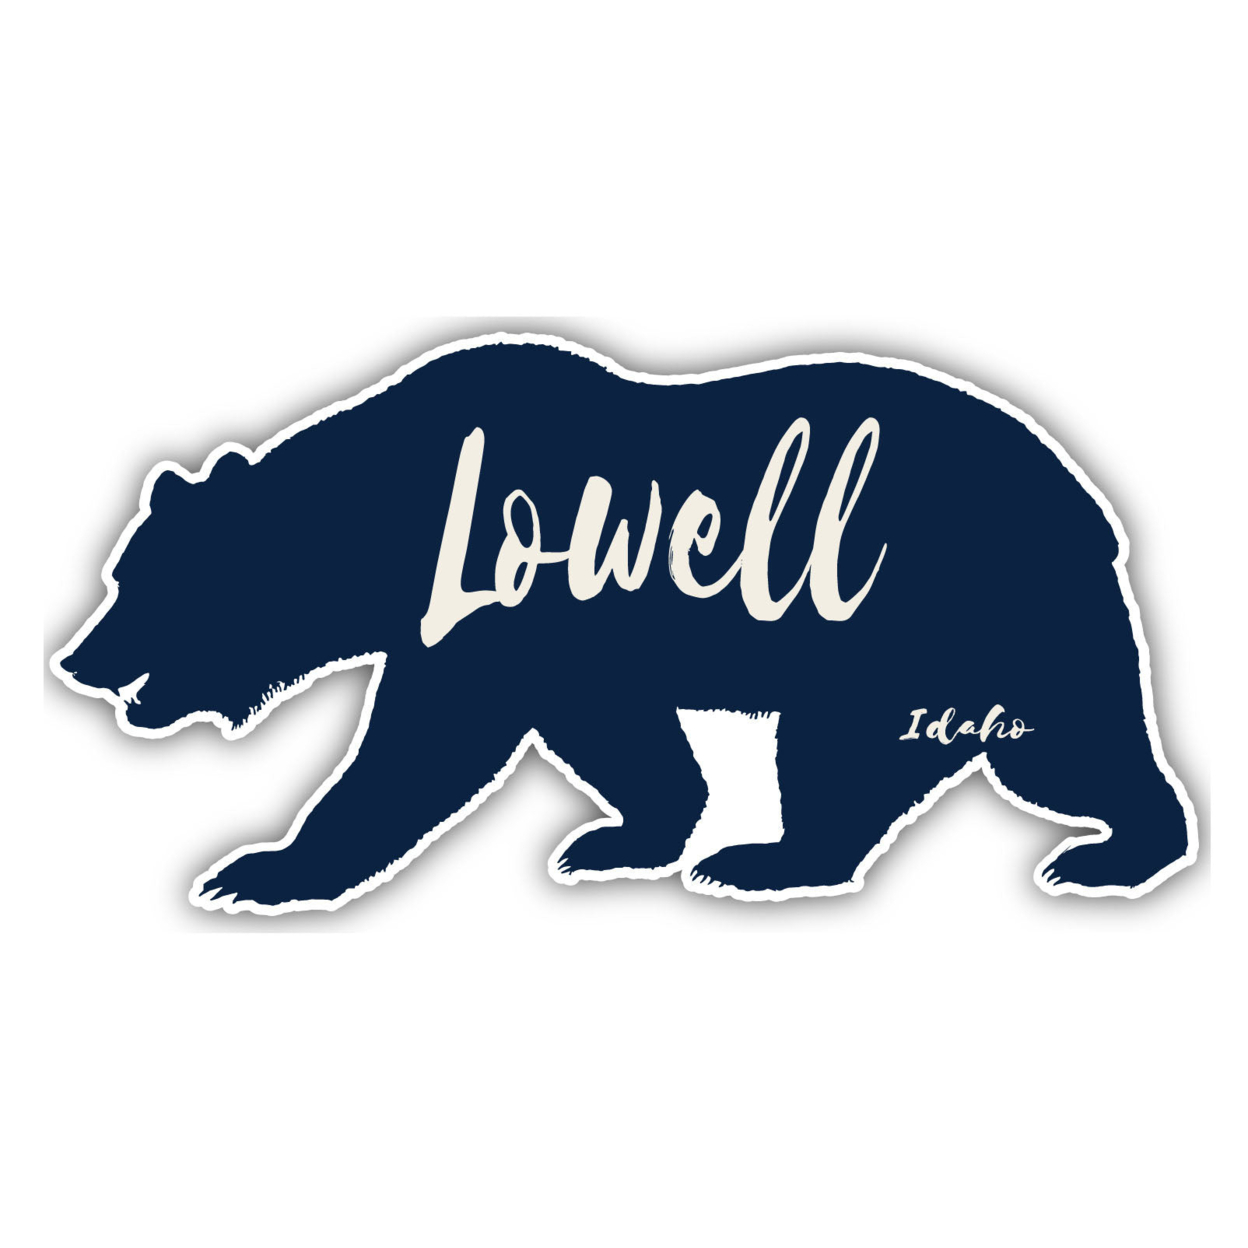 Lowell Idaho Souvenir Decorative Stickers (Choose Theme And Size) - 4-Inch, Bear